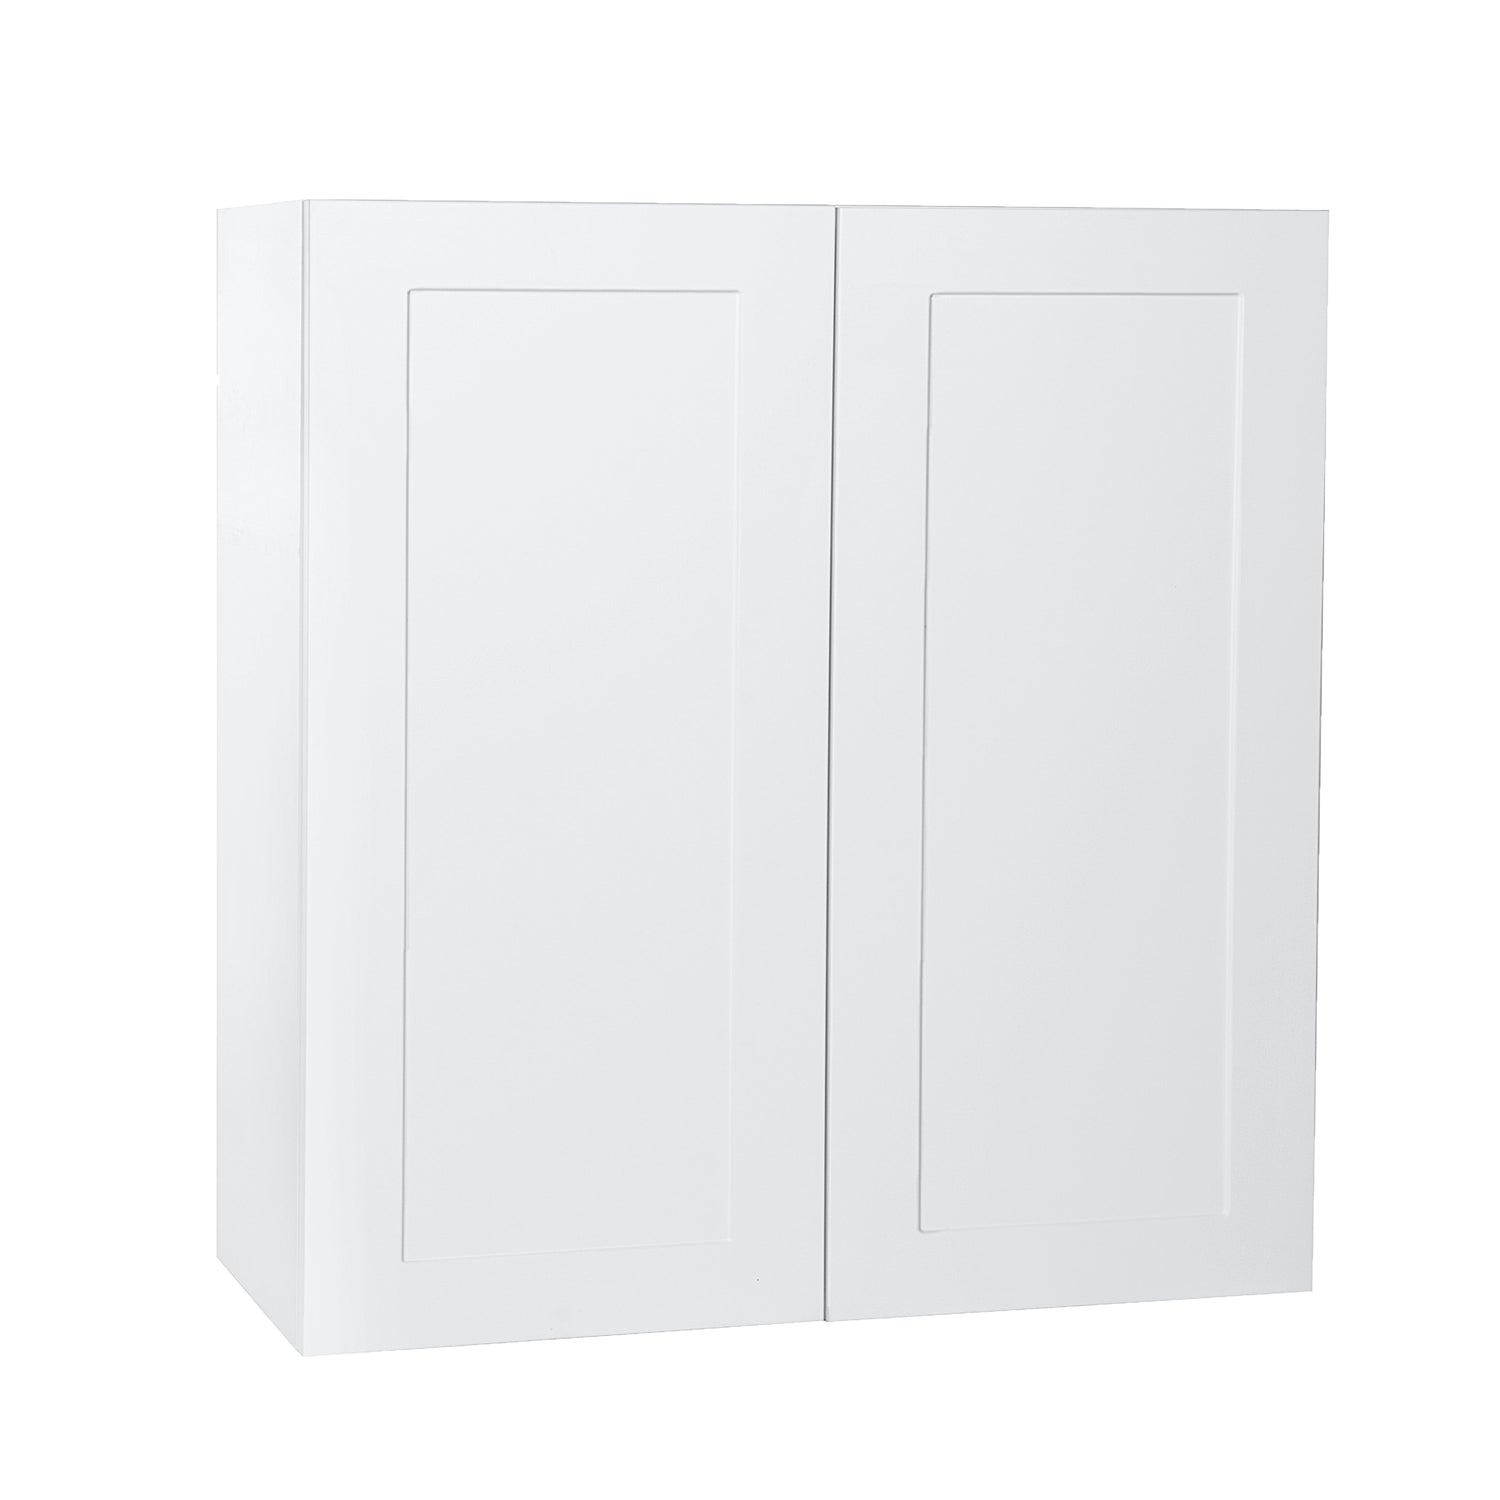 Quick Assemble Modern Style with Soft Close, White Shaker Wall Kitchen Cabinet, 2 Door (36 in W x 12 D x 30 in H) -  Pro-Edge HD